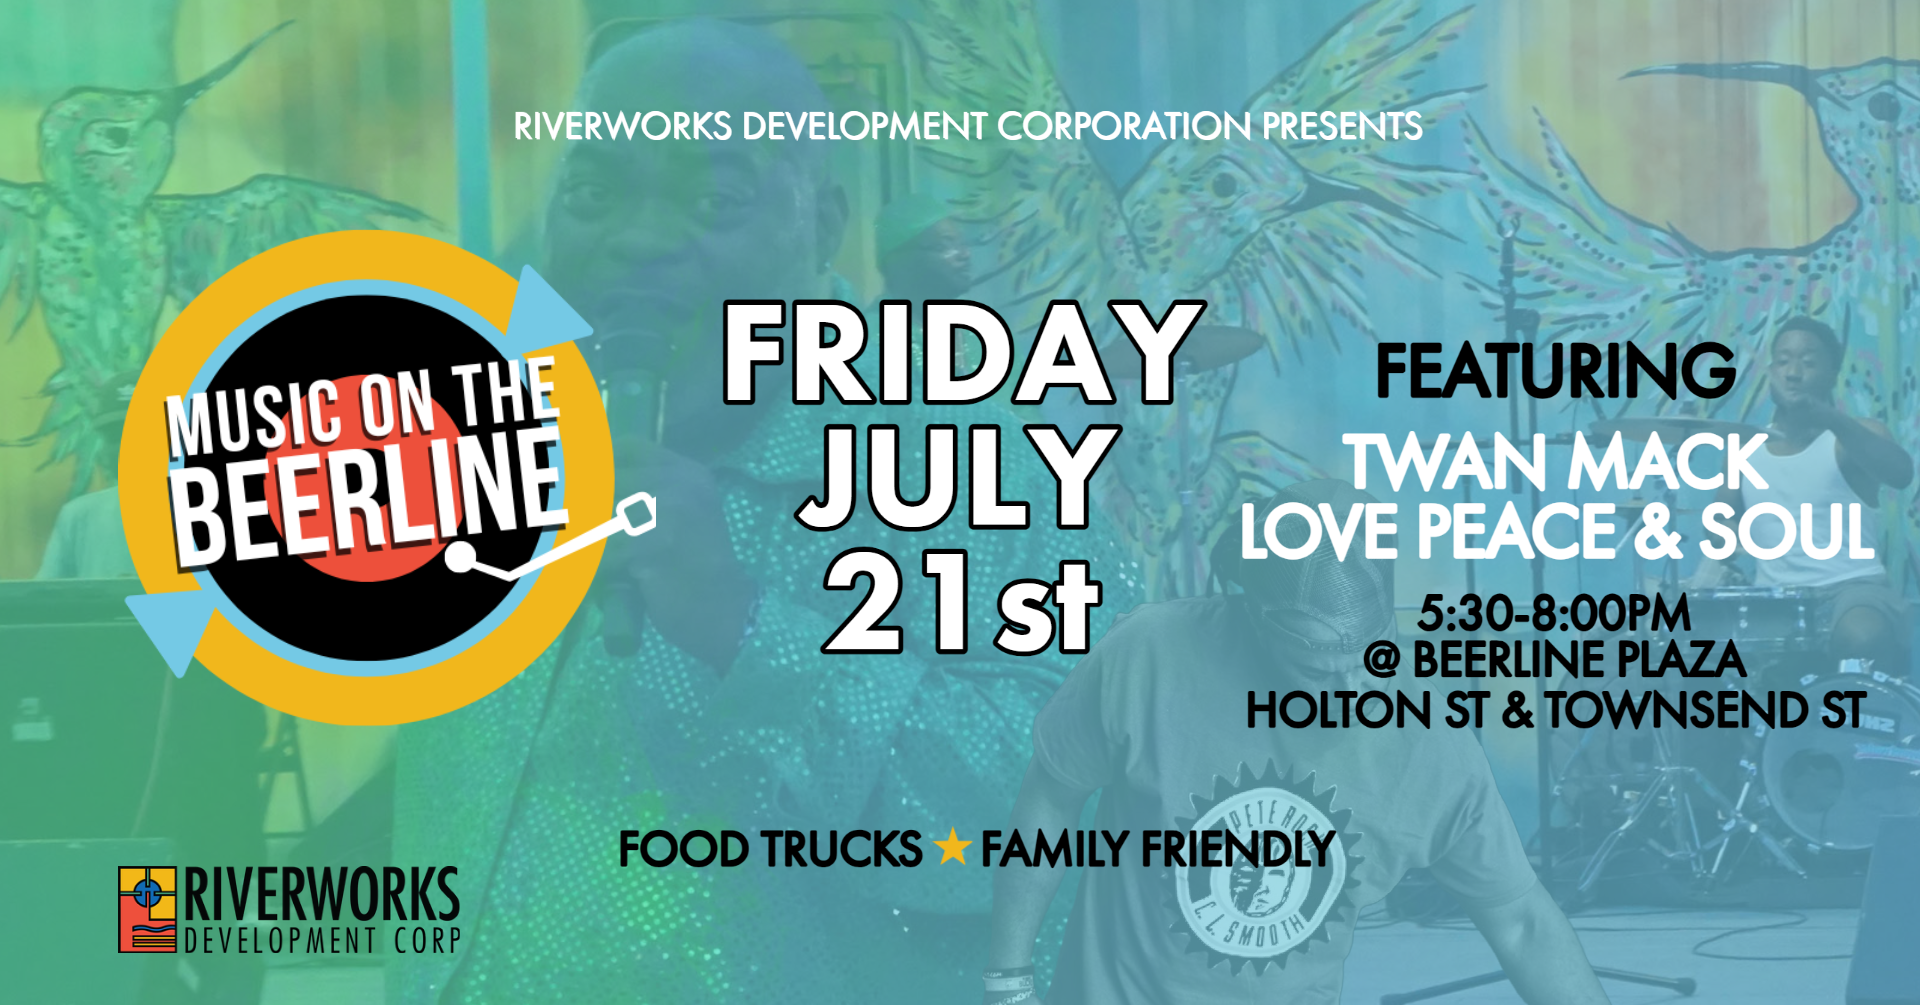 Music on the Beerline is back with Twan Mack and Love, Peace and Soul